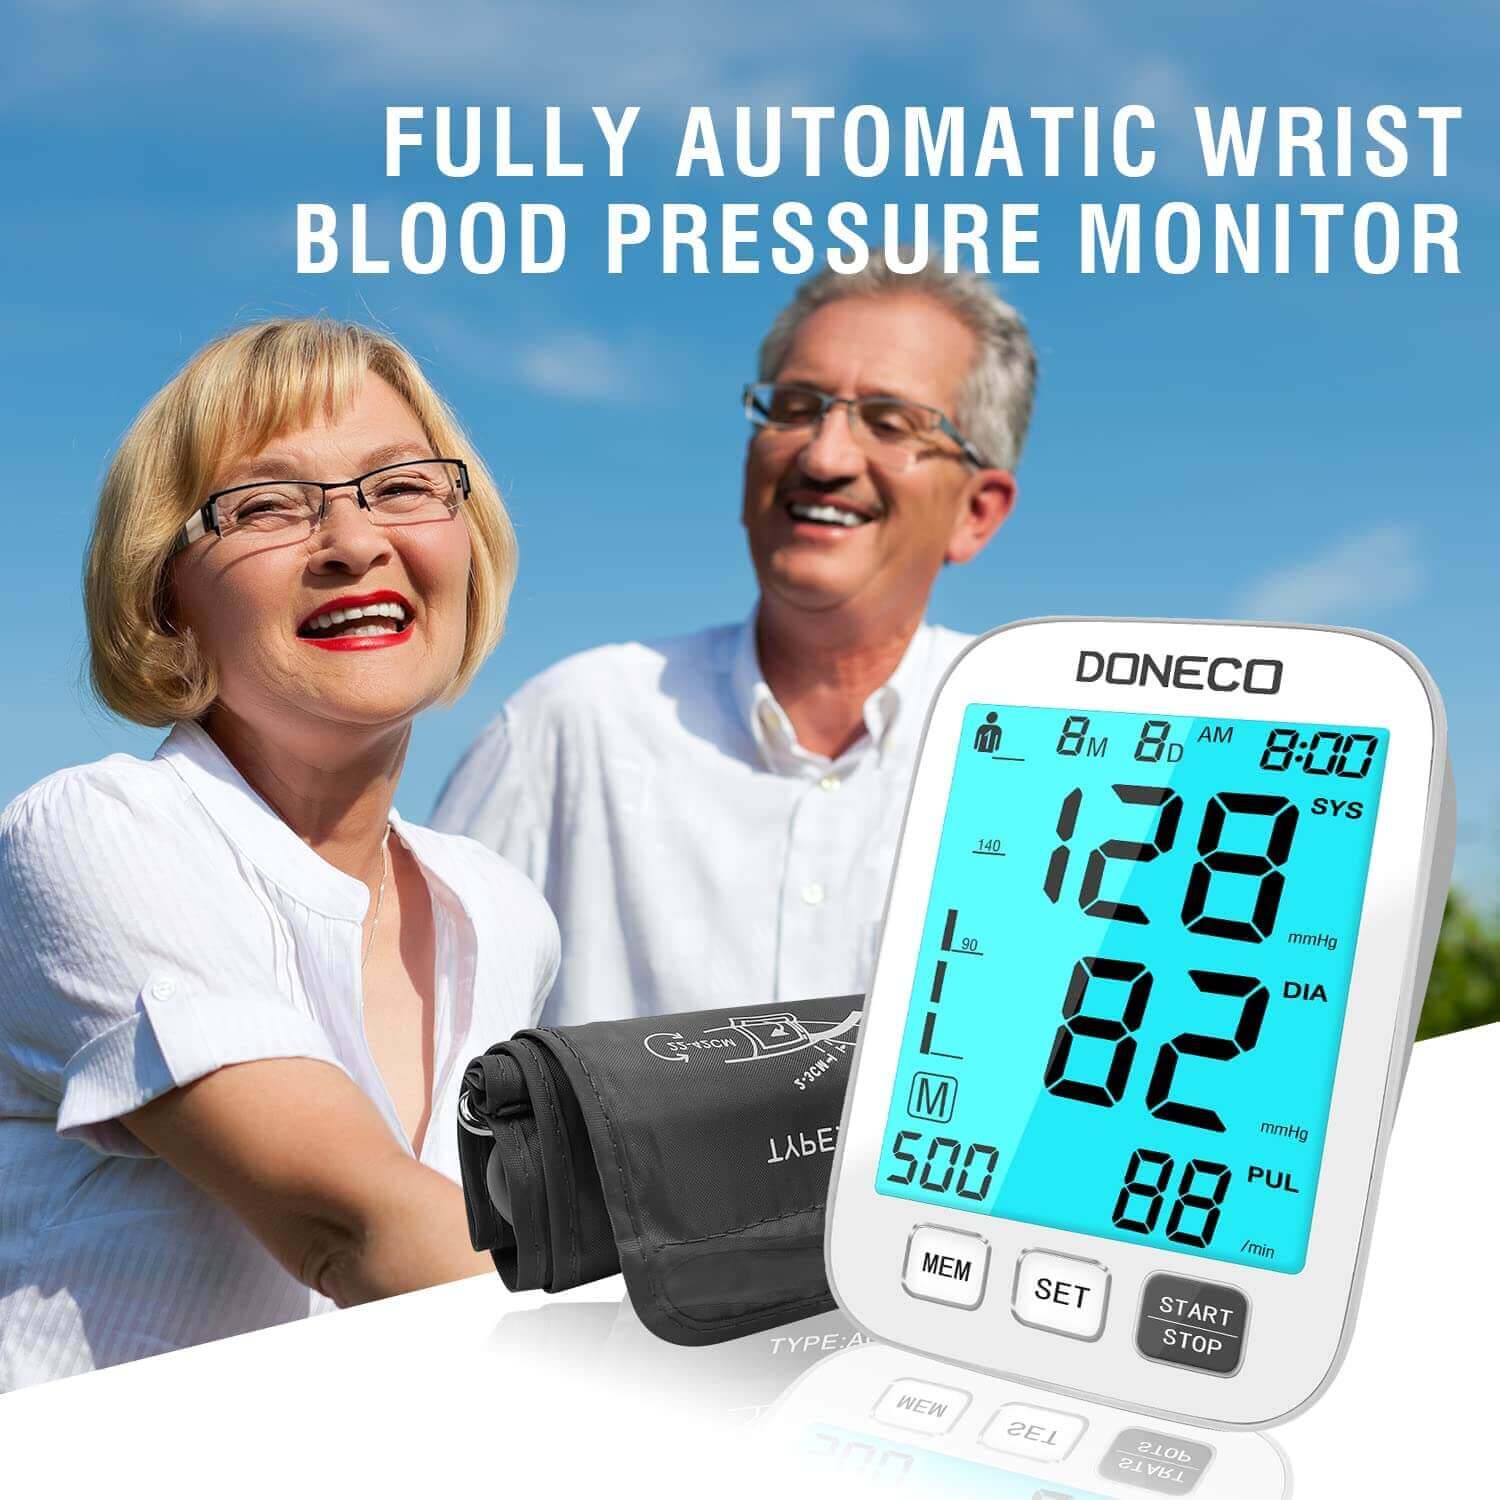 DONECO Blood Pressure Monitor Upper Arm Automatic Digital BP Monitor Adjustable Large Cuff Backlit Display 2x500 Memory Includes Batteries Monitoring Meter for Home Use - fully automatic wrist blood pressure monitor